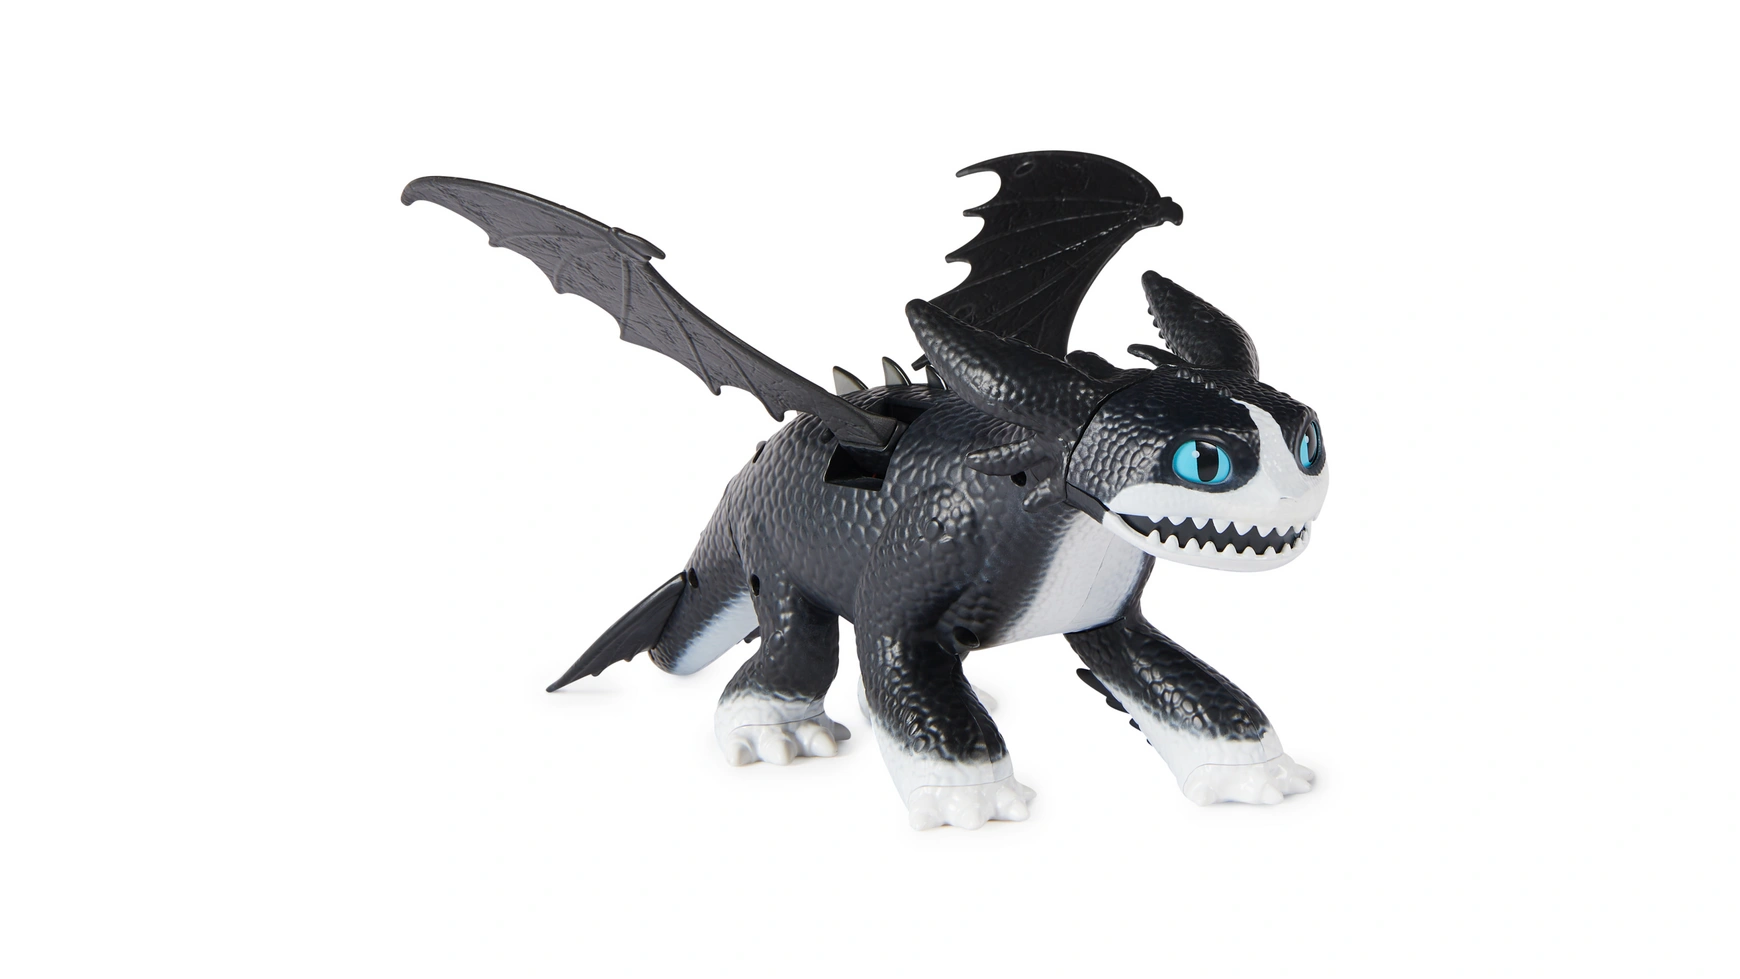 spin master dreamworks dragons fire and flight фигура грома 12 дюймов Spin Master DreamWorks Dragons Fire and Flight, фигура грома 12 дюймов